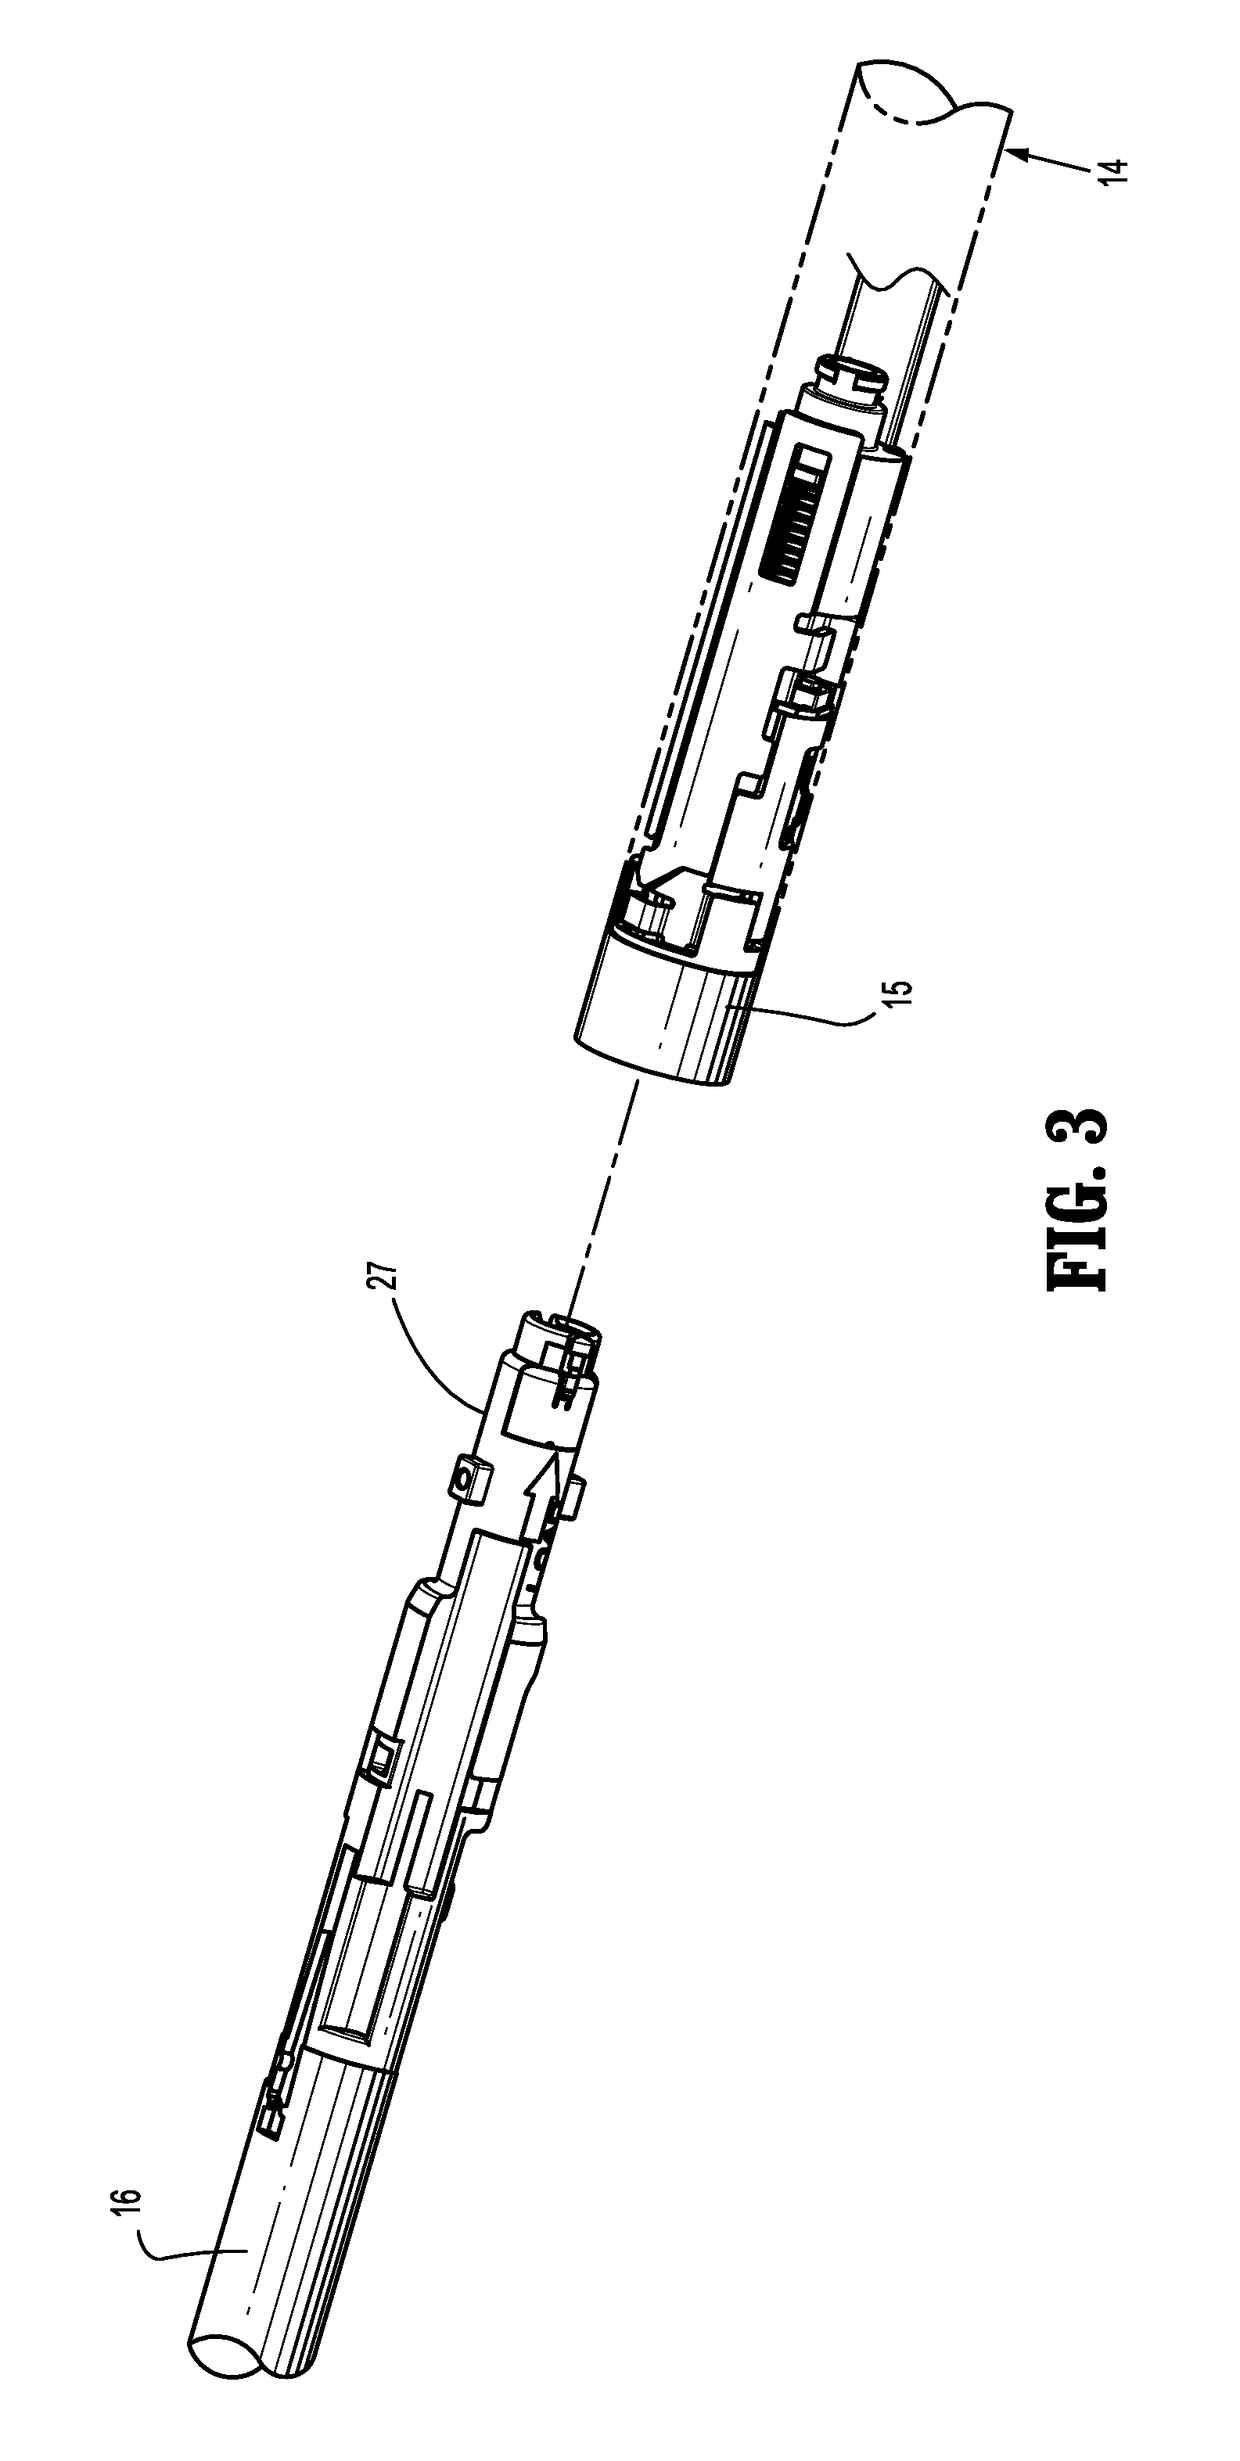 Authentication system for reusable surgical instruments